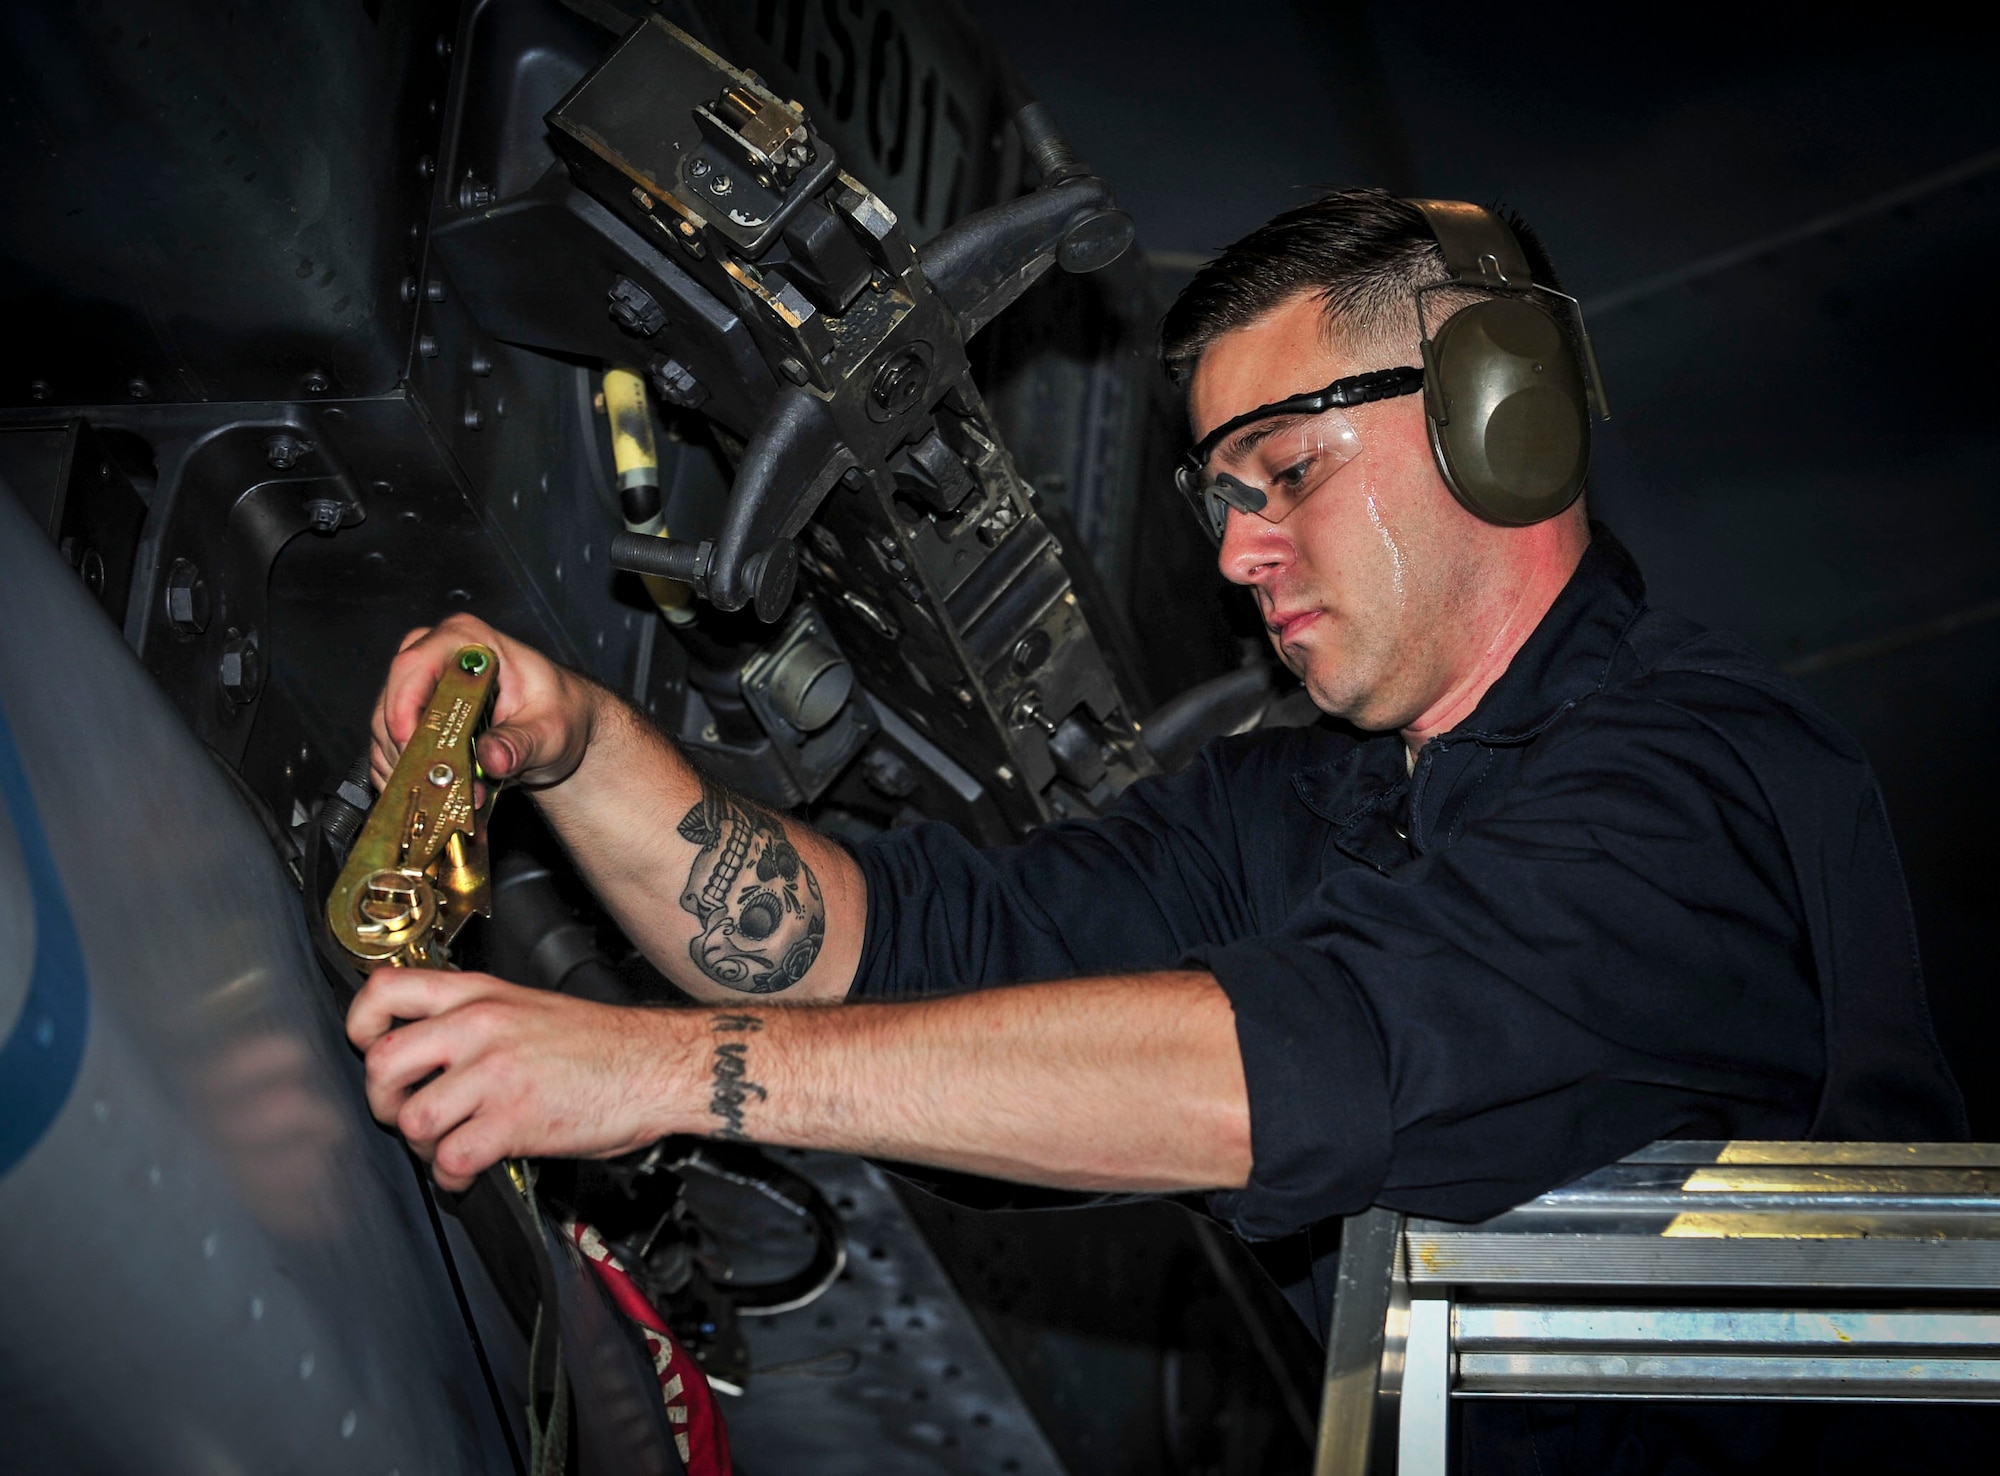 Staff Sgt. Robert Wagner Jr., 5th Aircraft Maintenance Squadron weapons load crew team chief, removes a strap from a B-52H Stratofortress weapon system at Minot Air Force Base, N.D., Aug. 24, 2015. Wagner and his team were required to load four weapons onto the aircraft as part of Air Force Global Strike Command’s Global Strike Challenge Competition and used constant communication to ensure the weapons were loaded quickly, safely and effectively. (U.S. Air Force photo/Senior Airman Stephanie Morris)